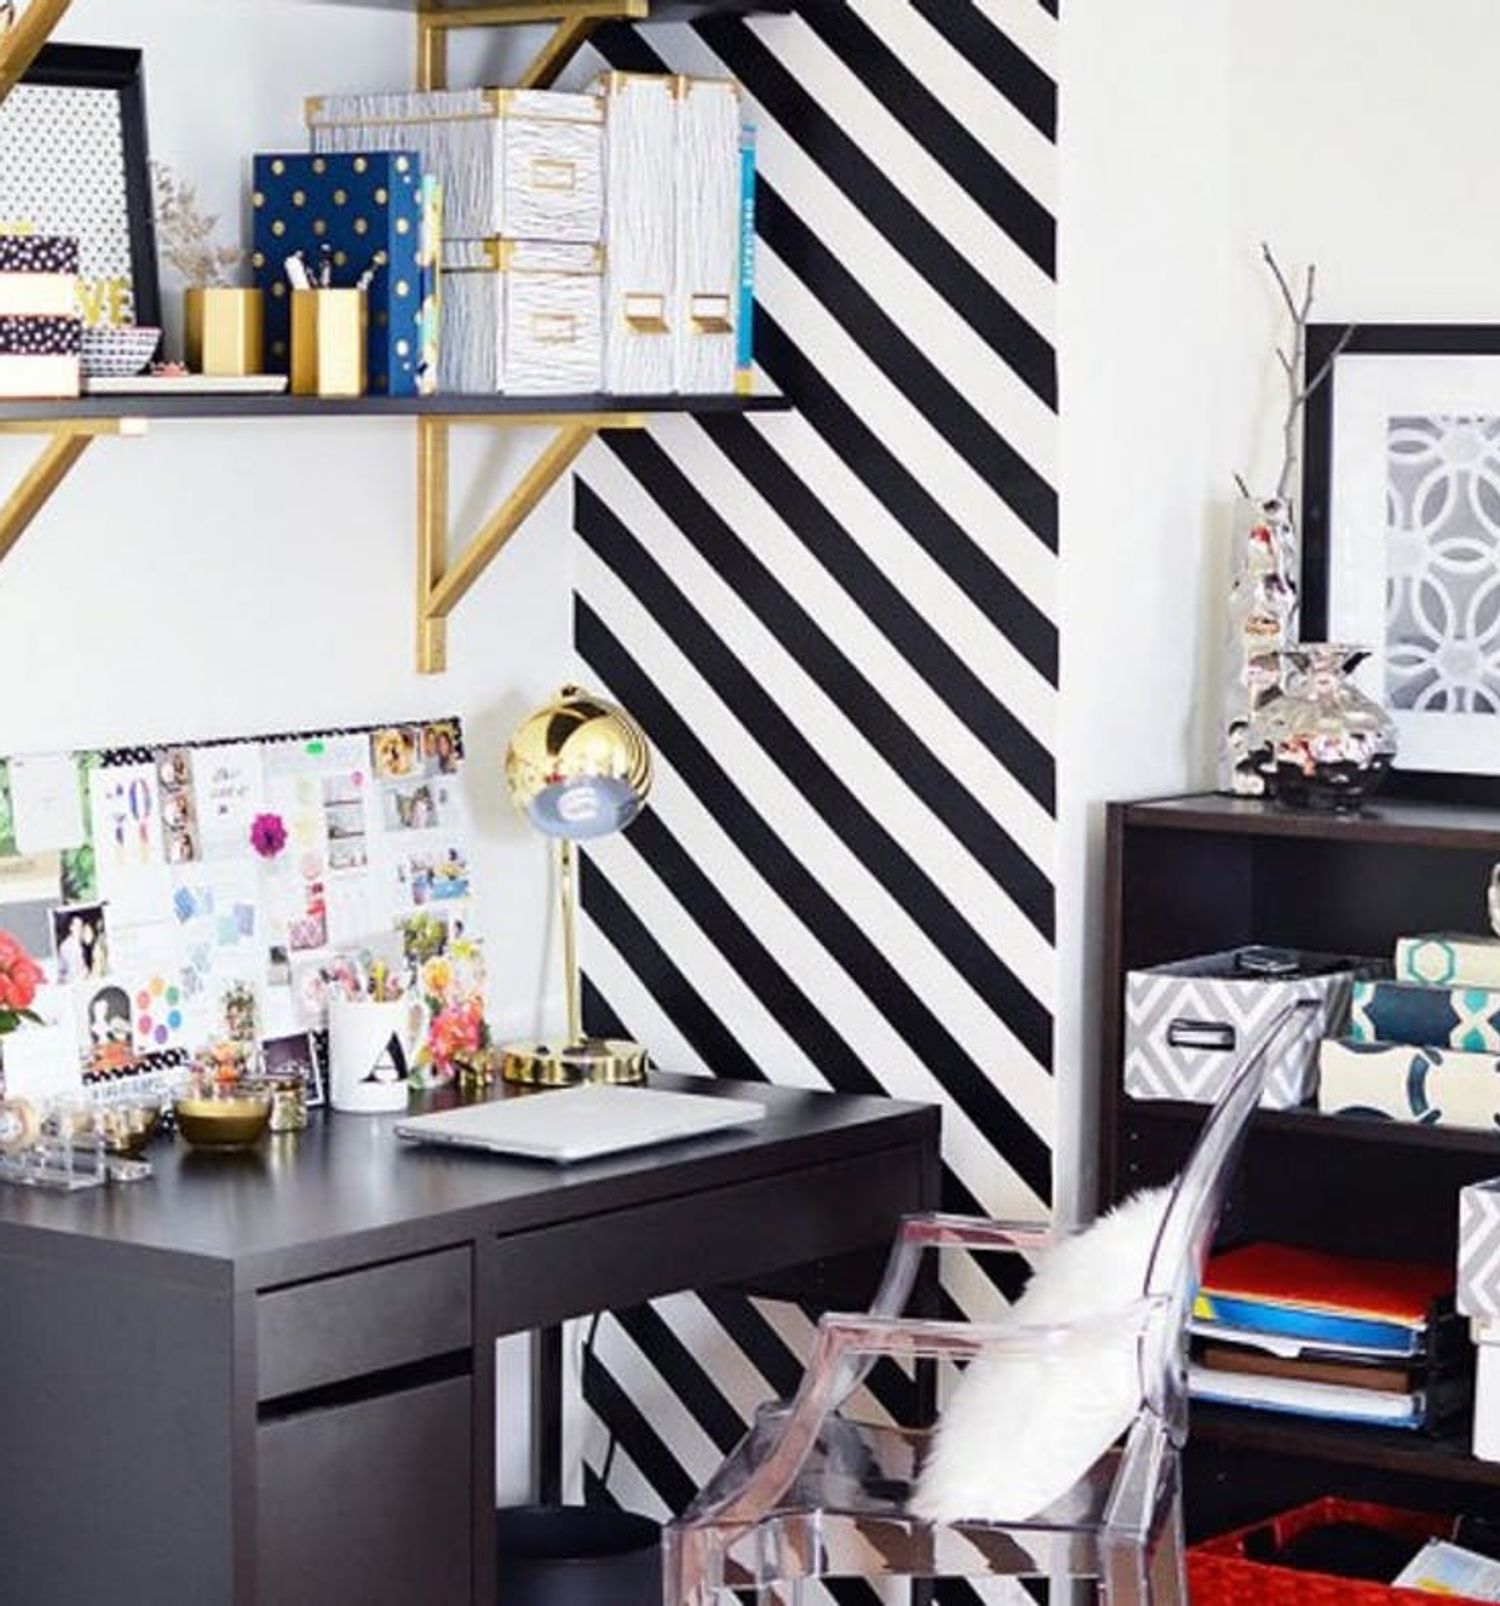 Life Hack: Washi Tape Storage - The Well-Appointed Desk